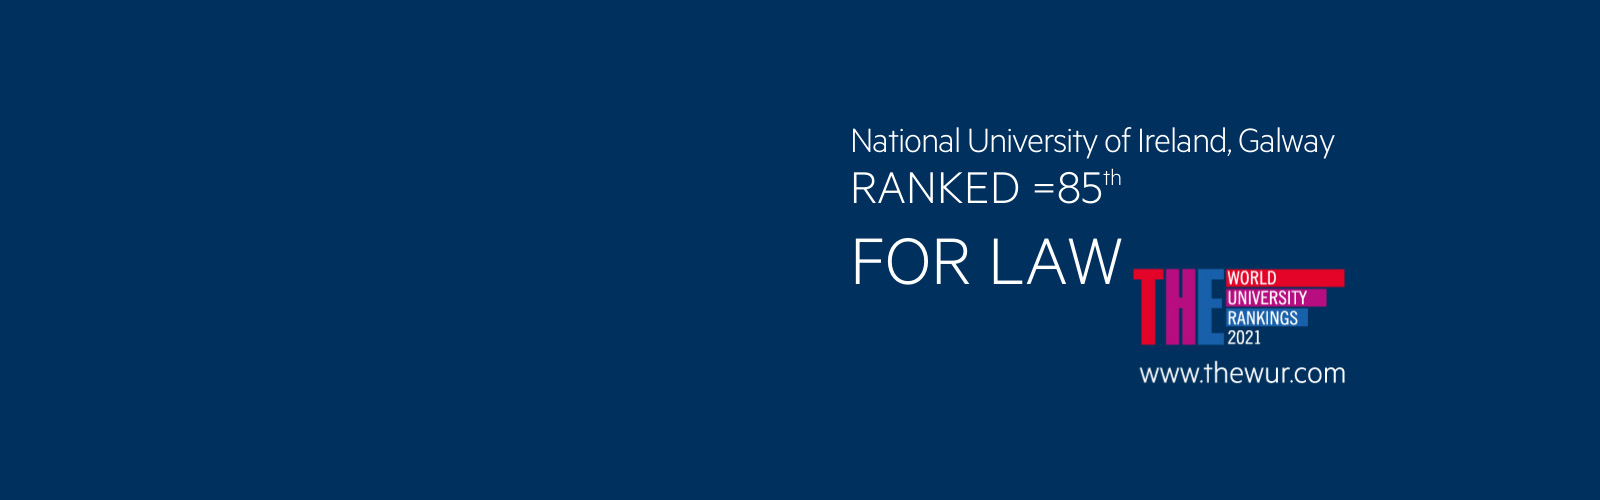 NUI Galway School of Law Ranked 85th in the World for Law